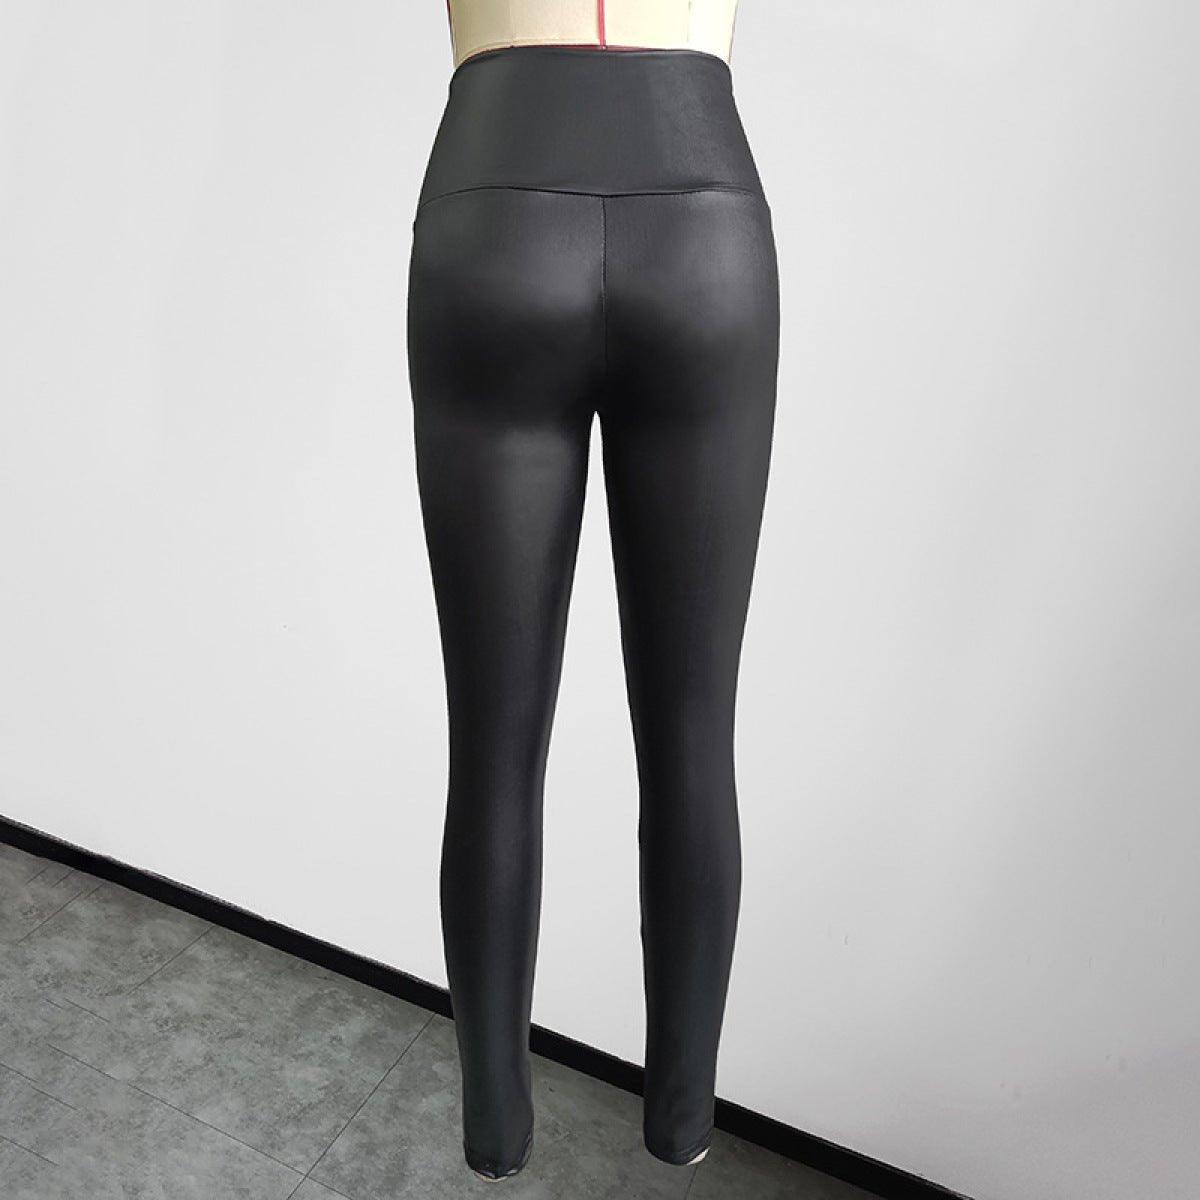 Faux Leather Pants in Black High Waist Elastic Buttoned